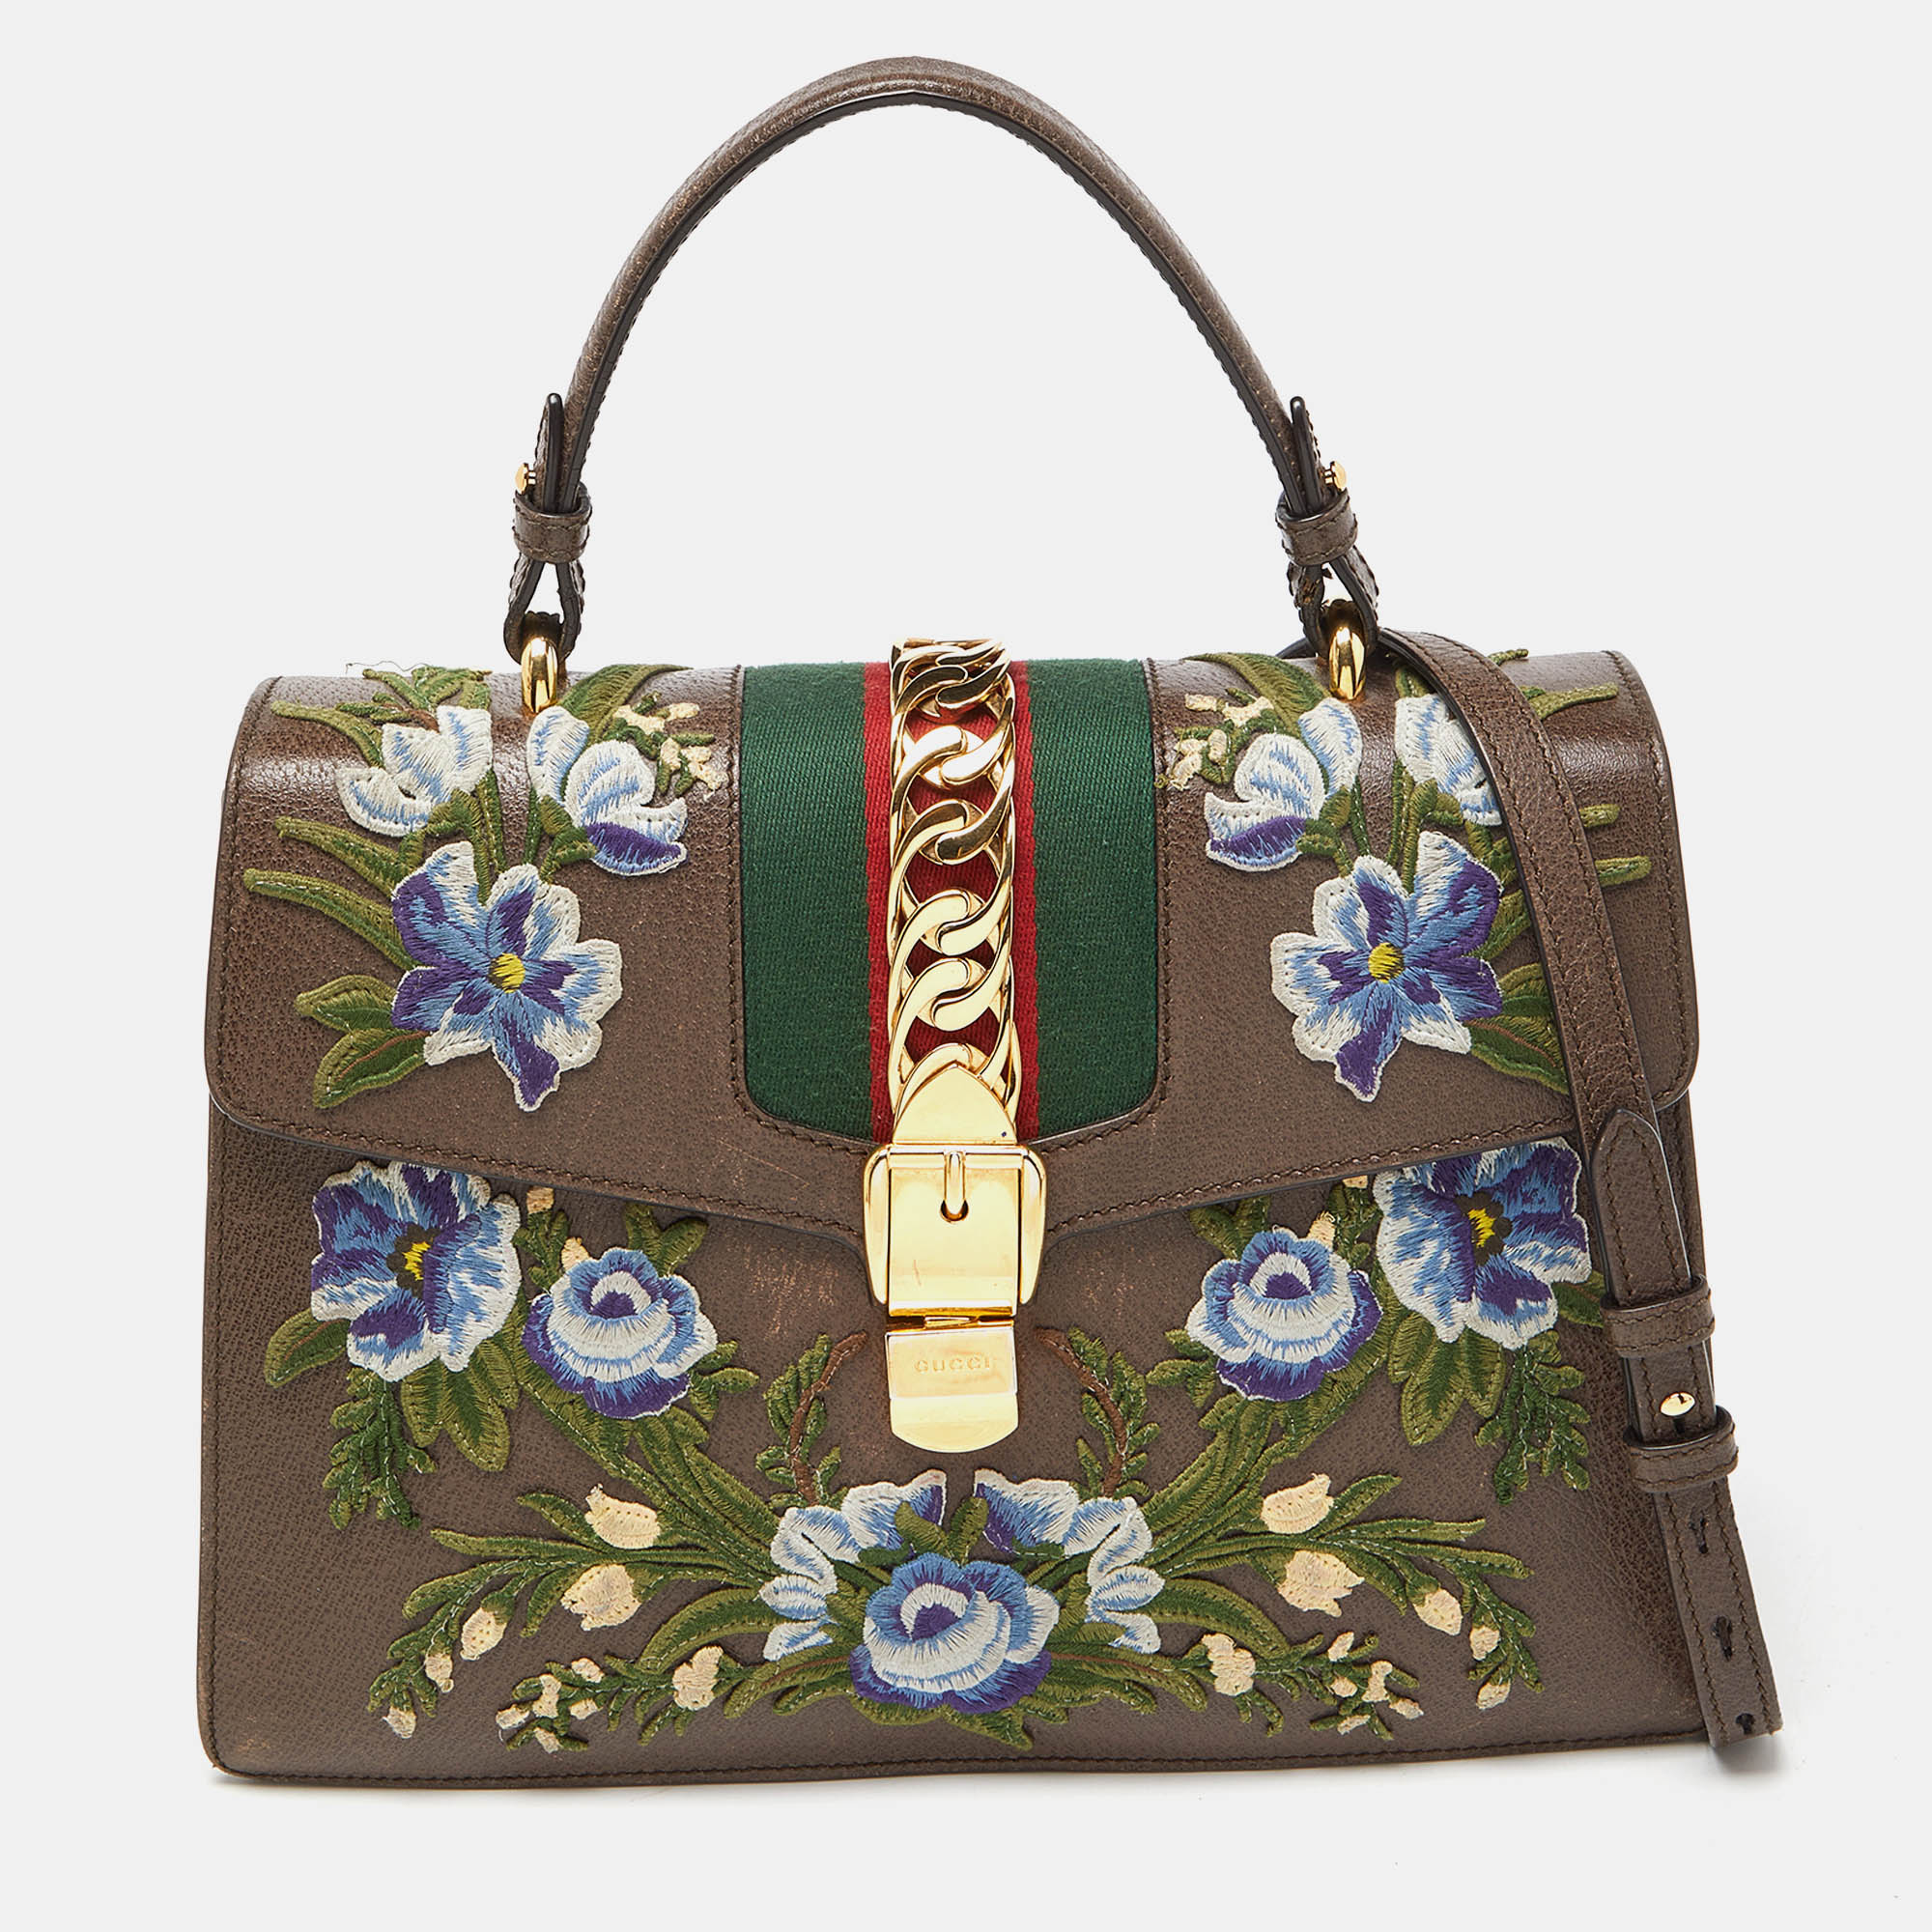 Gucci brown floral embroidered leather medium sylvie top handle bag